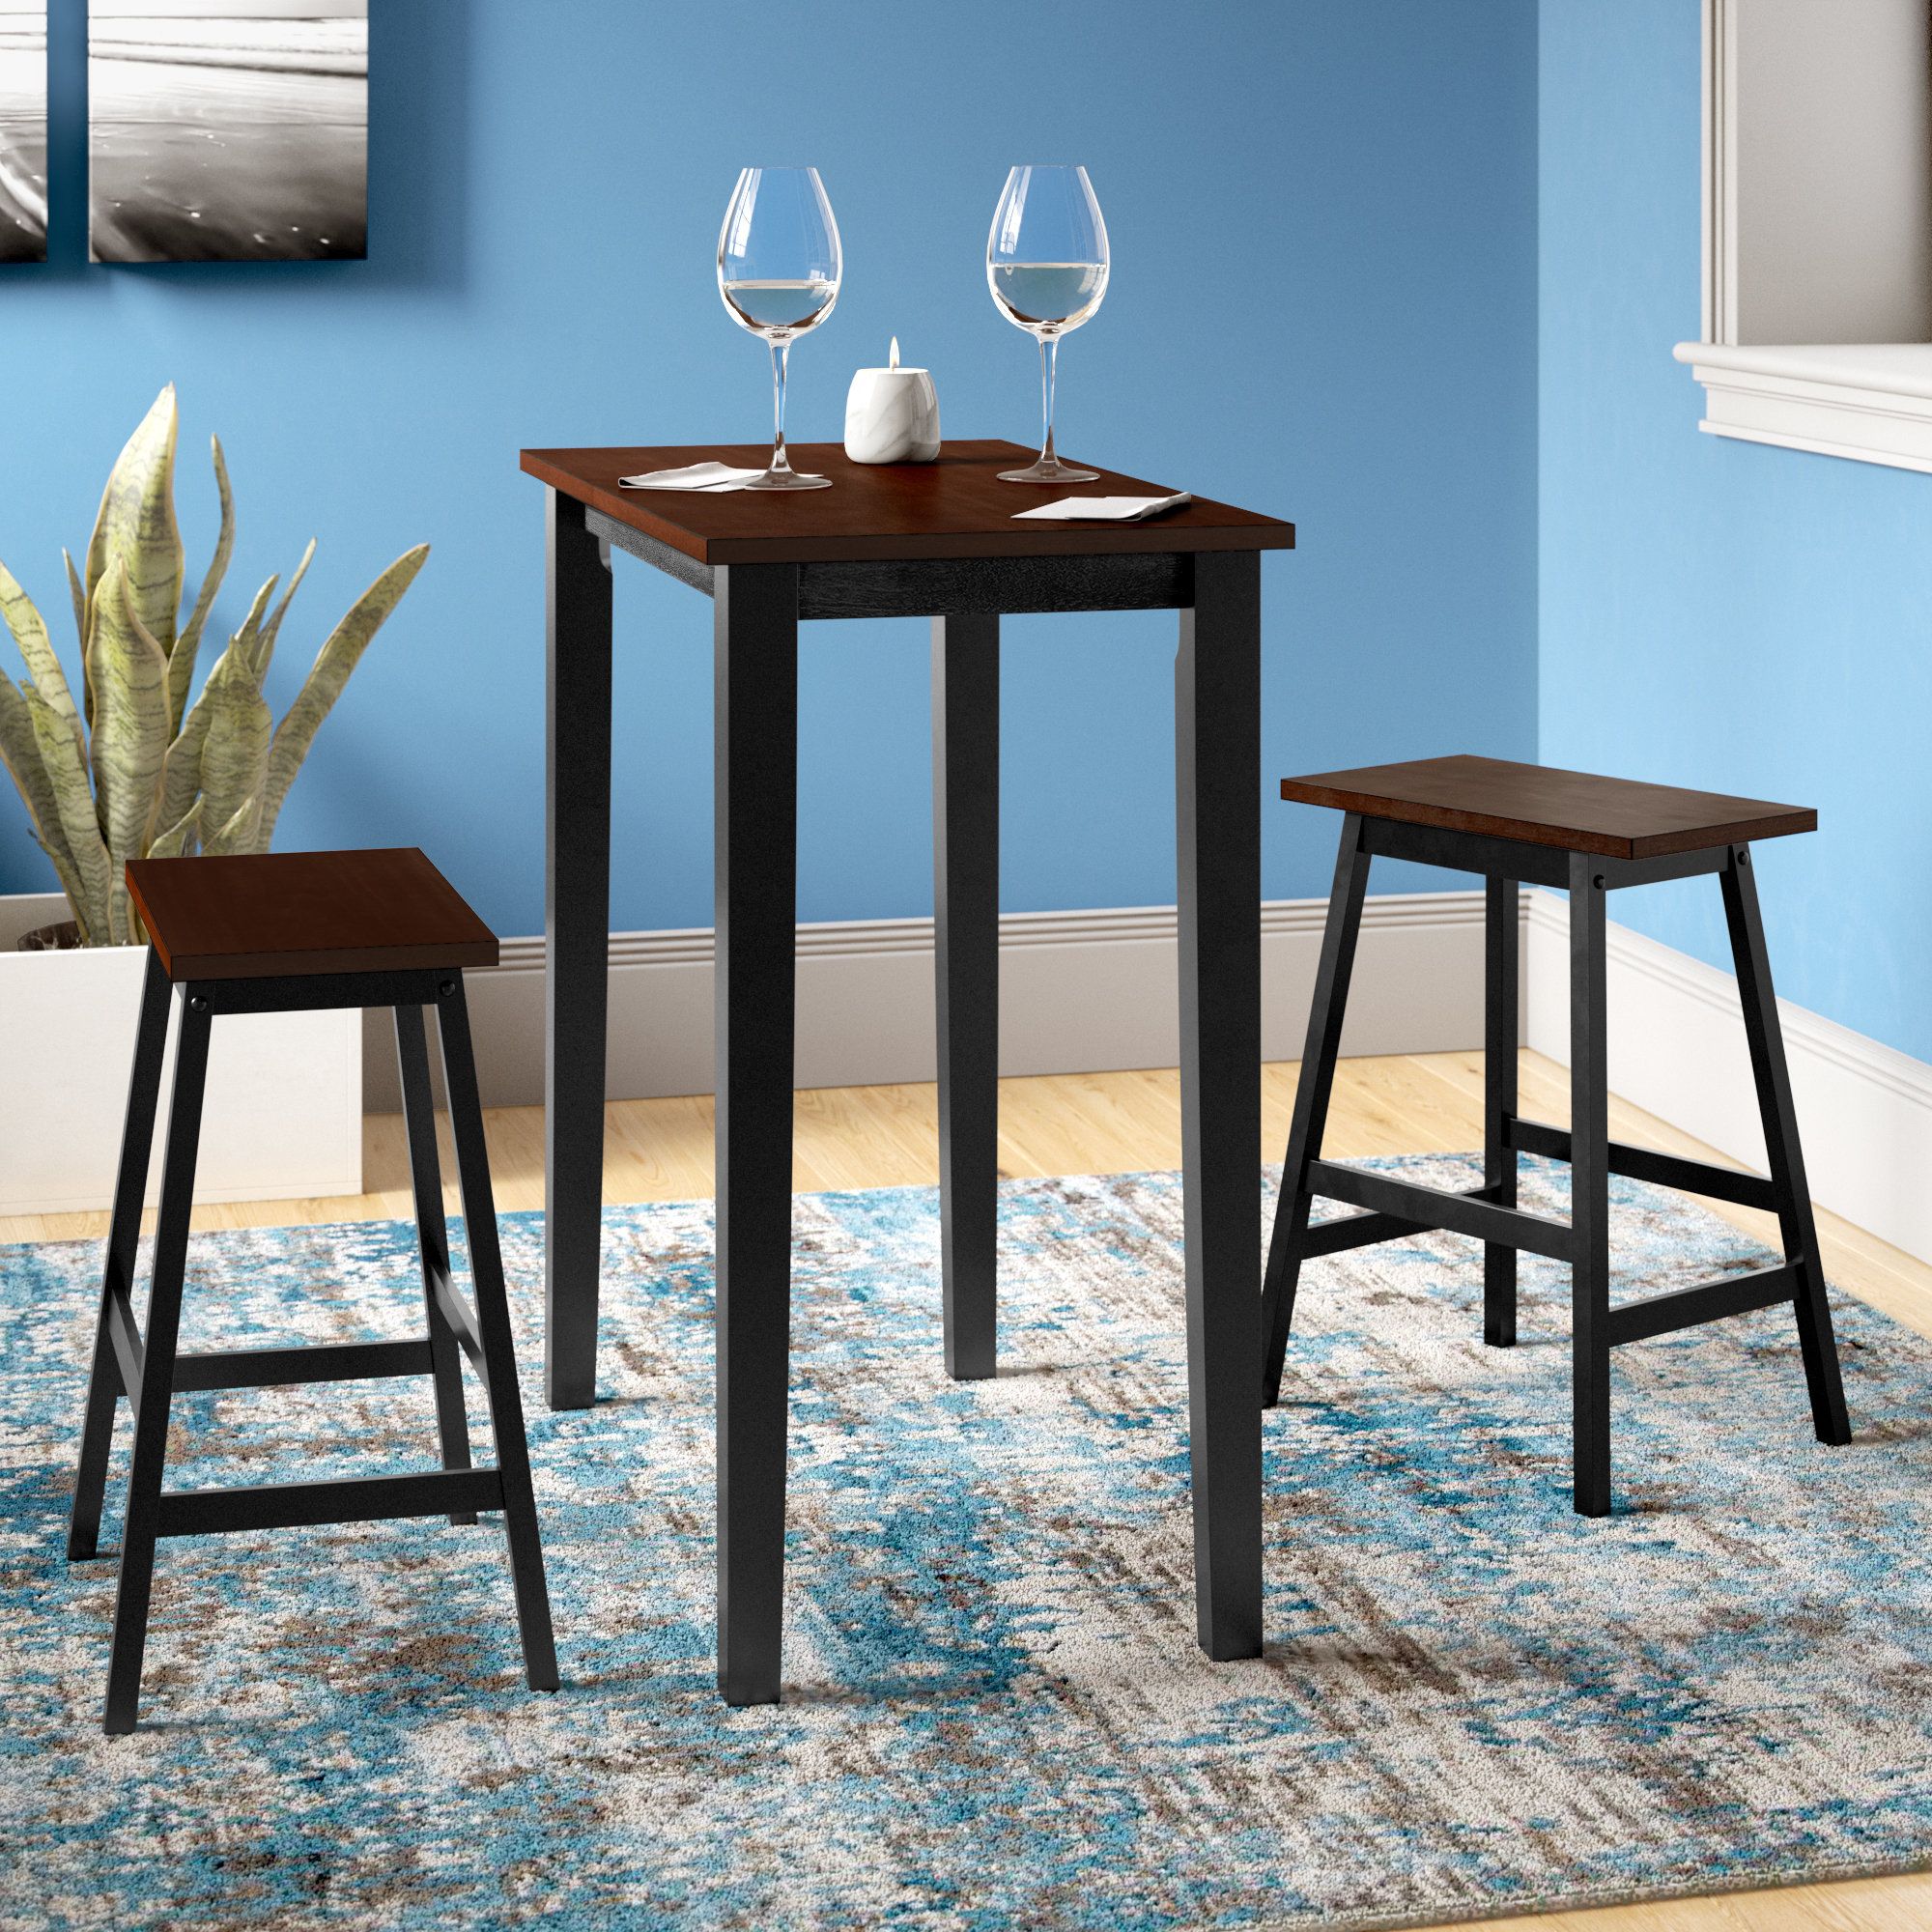 Ryker 3 Piece Dining Set With Most Popular Ryker 3 Piece Dining Sets (View 3 of 20)